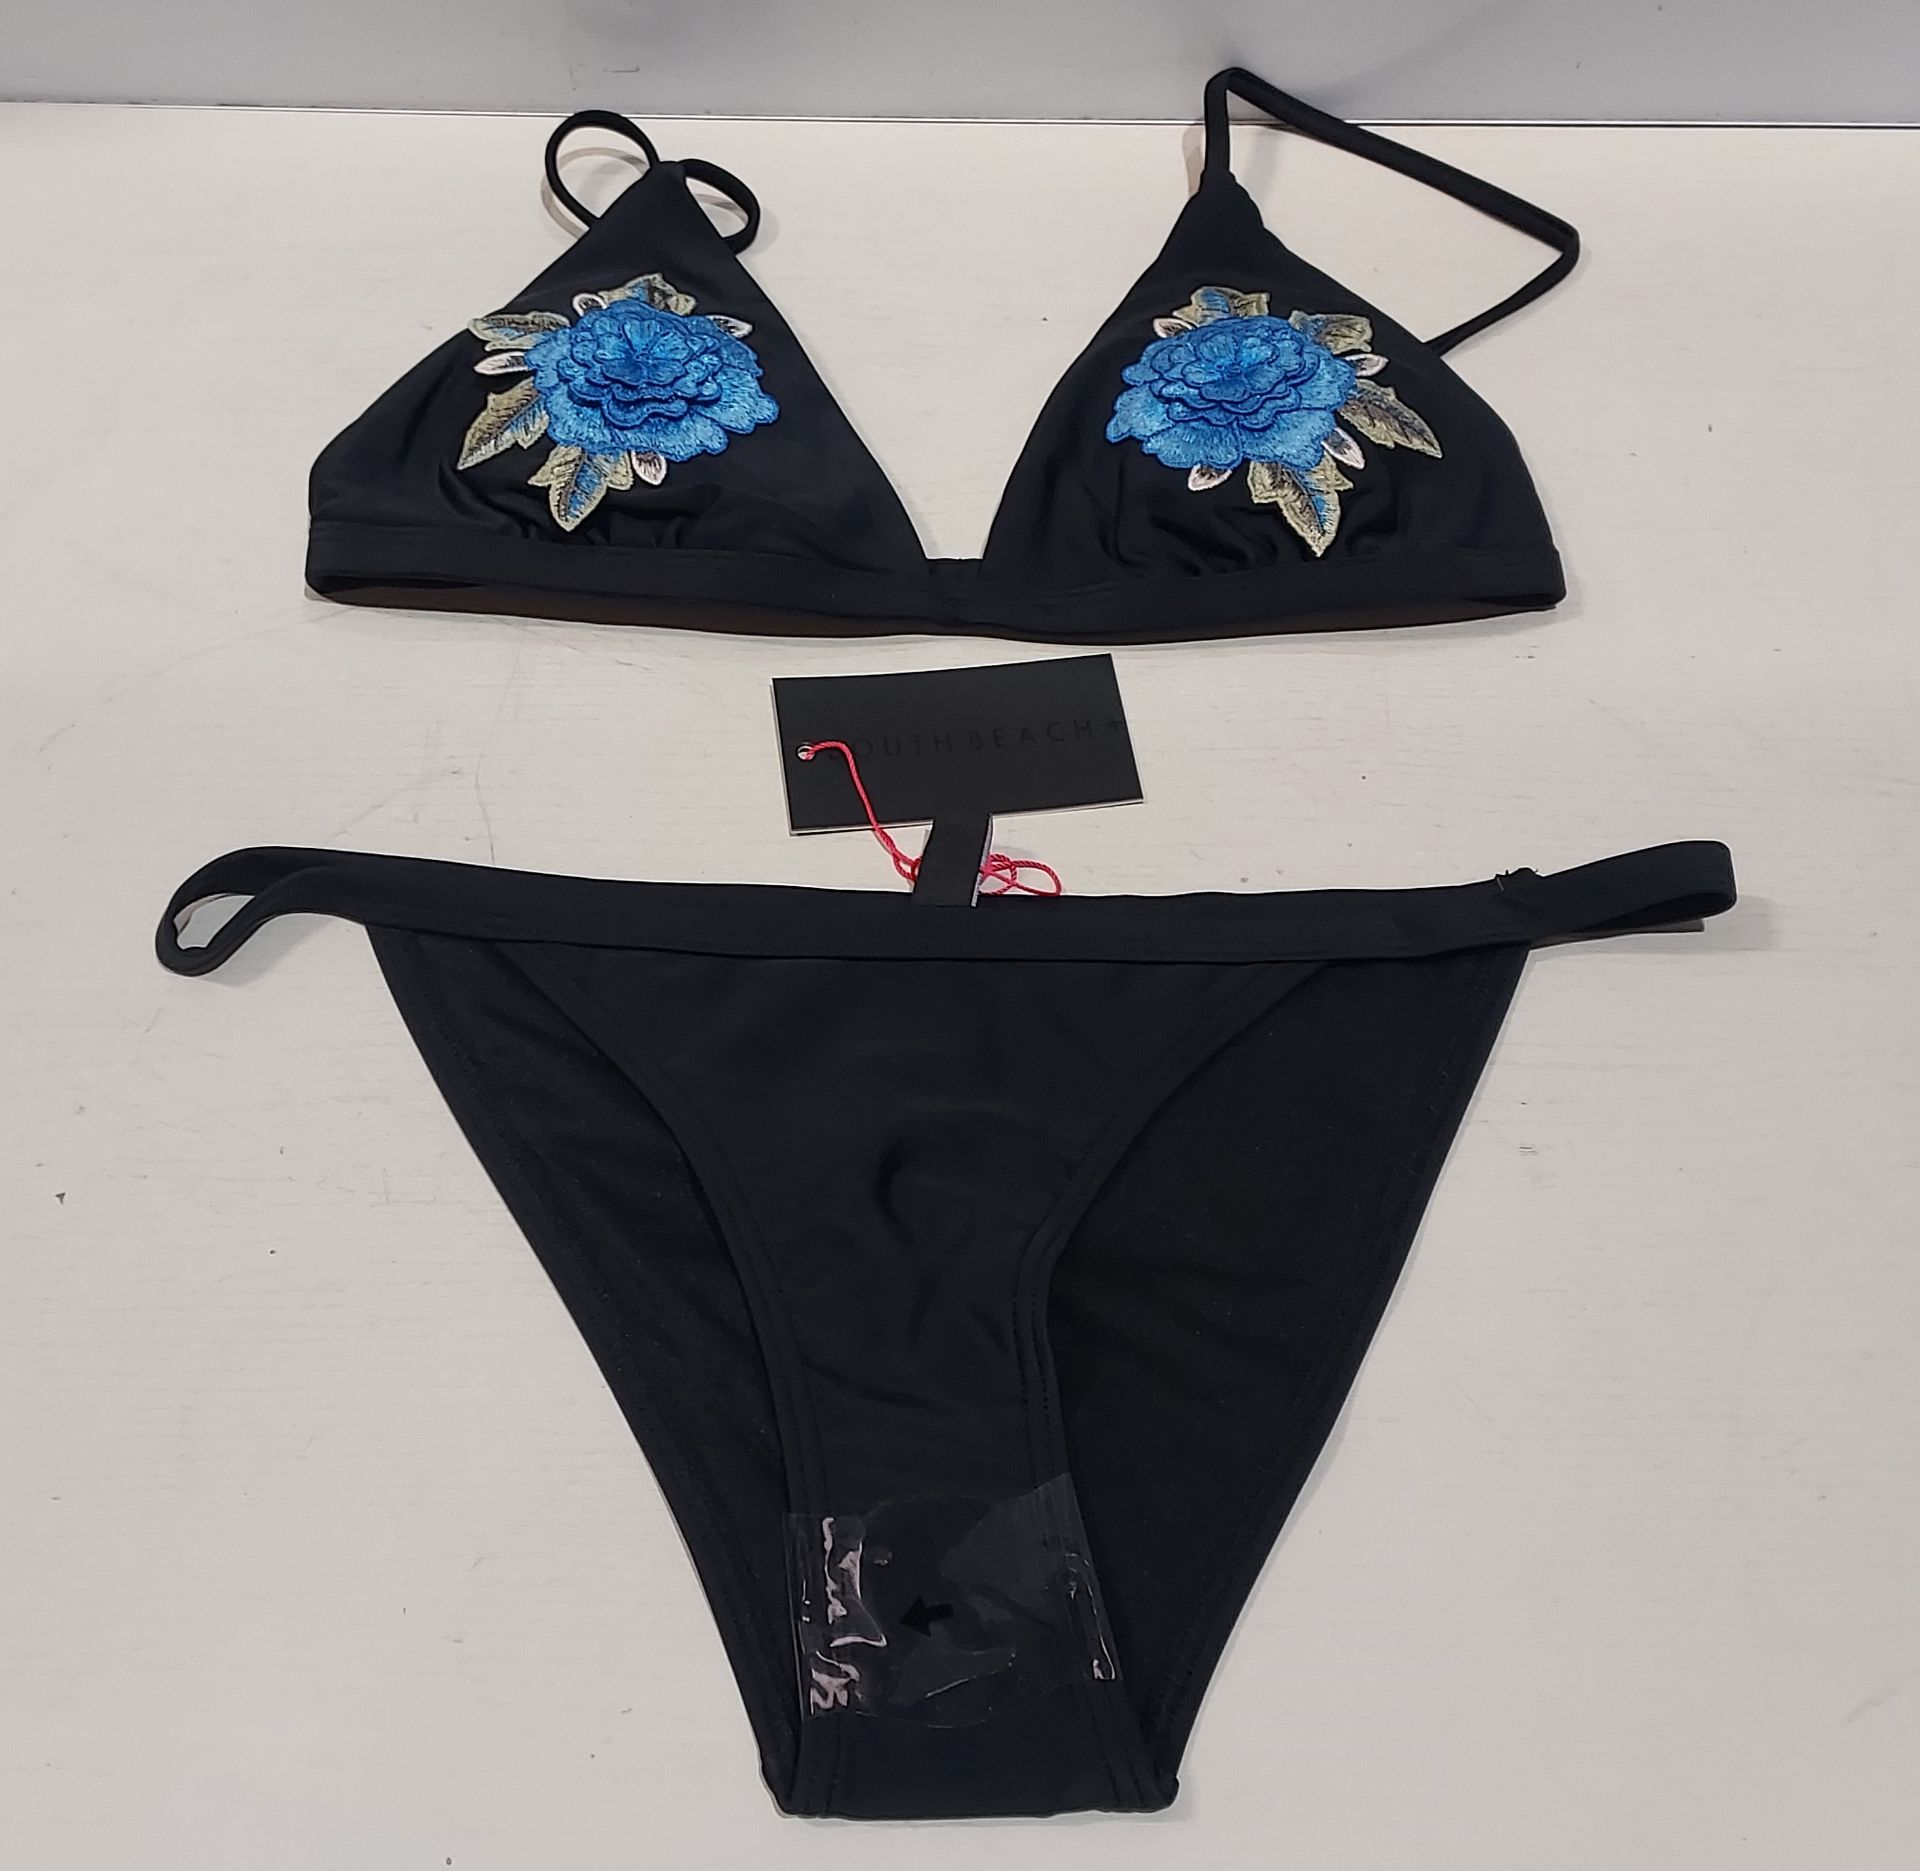 100 X BRAND NEW SOUTH BEACH 3D FLOWER PRINT TRIANGLE BIKINI TOPS - IN BLACK AND BLUE - IN MIXED